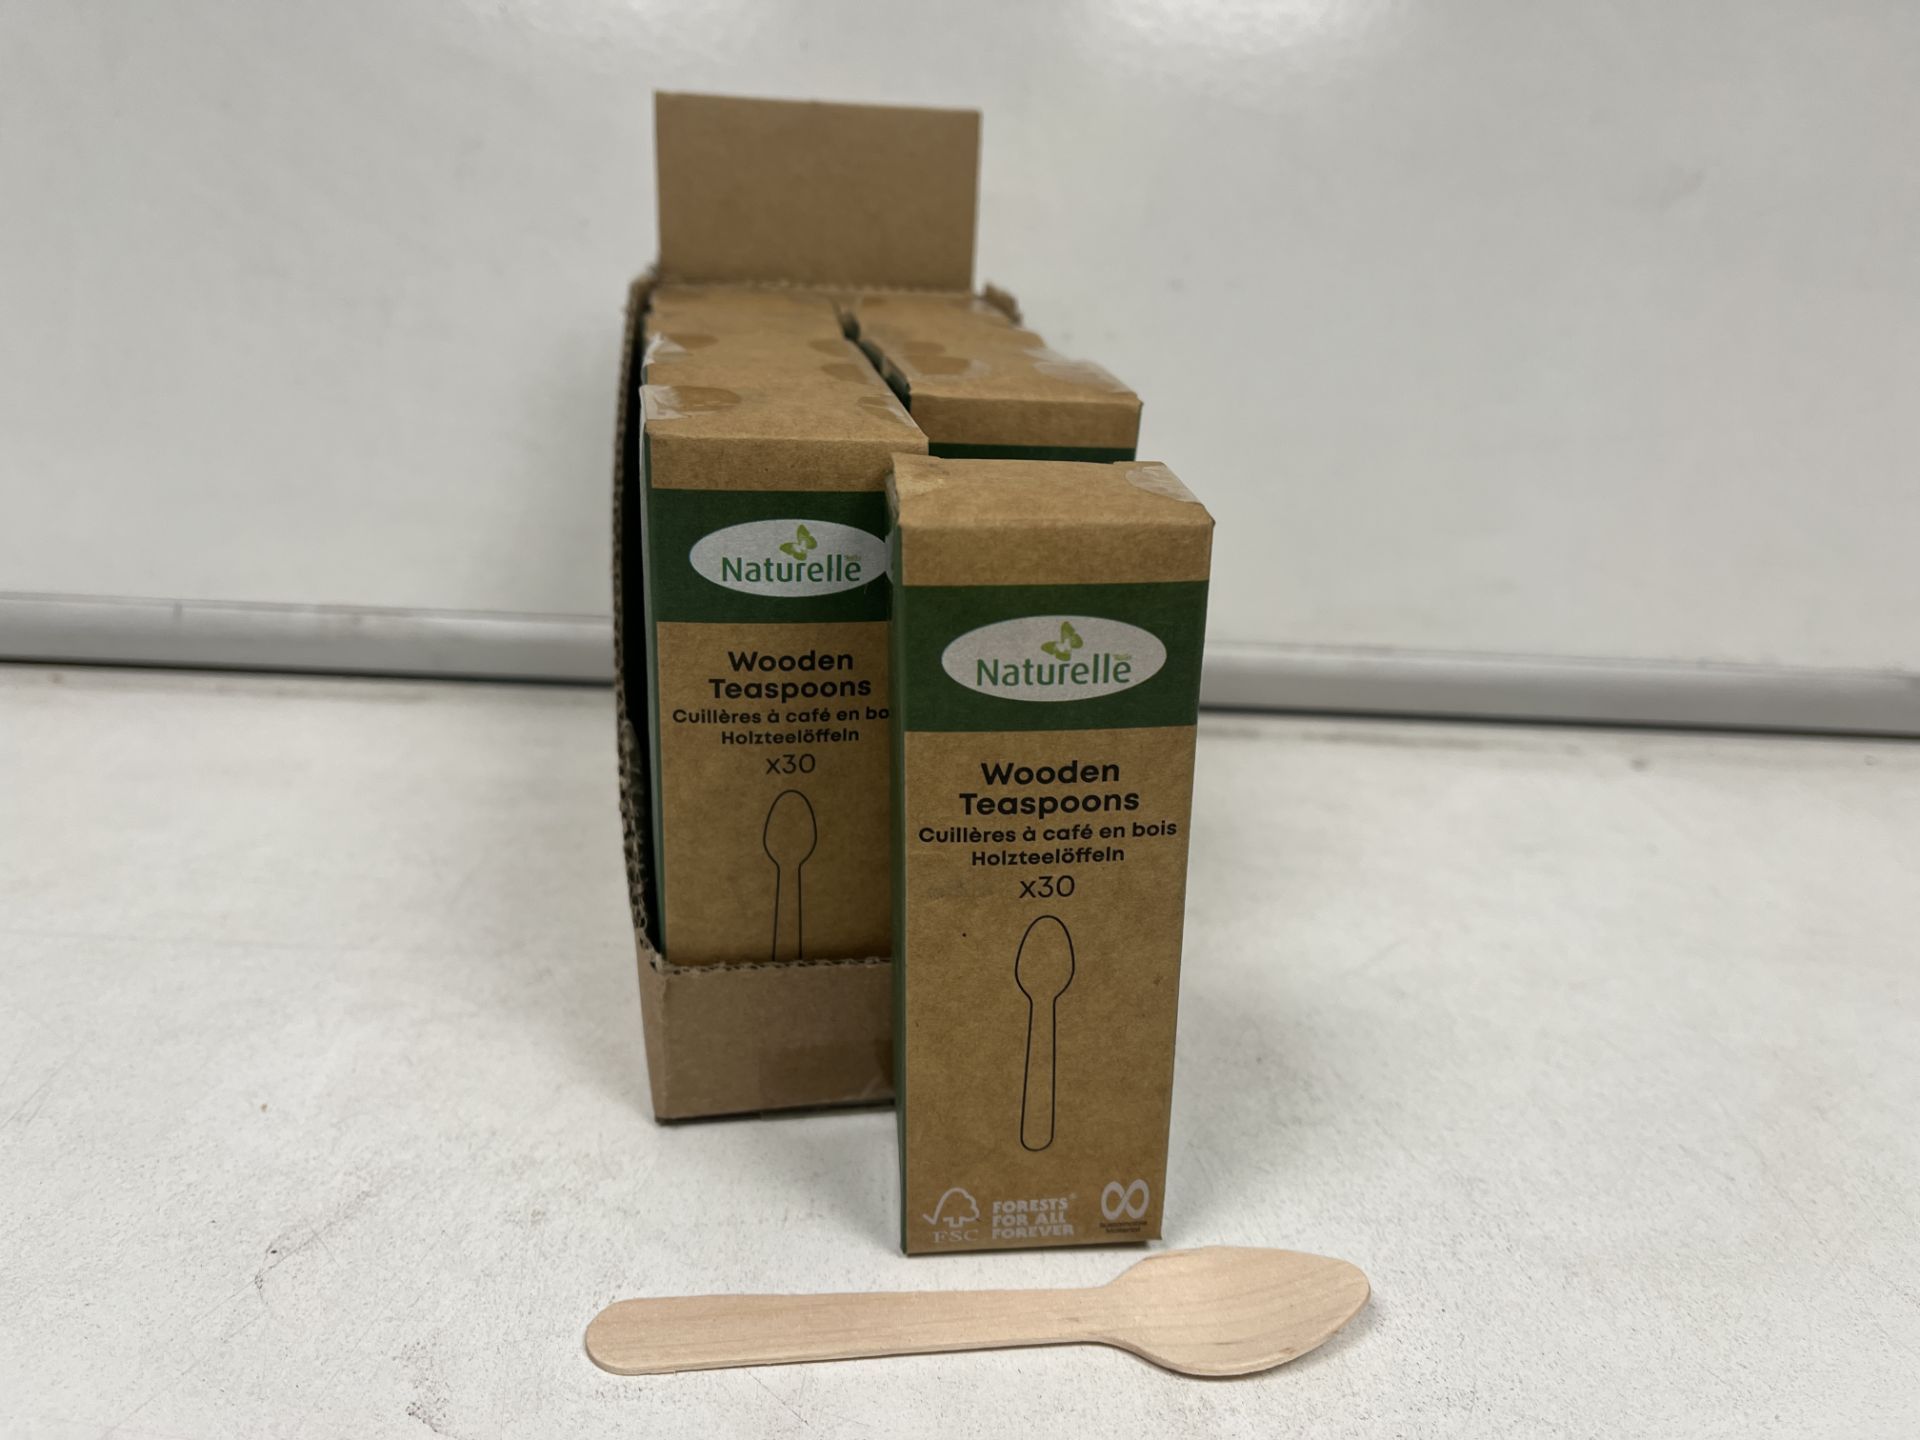 60 X NEW BOXED PACKS OF 30 NATURELLE WOODEN TEASPOONS. (ROW9.3MID)